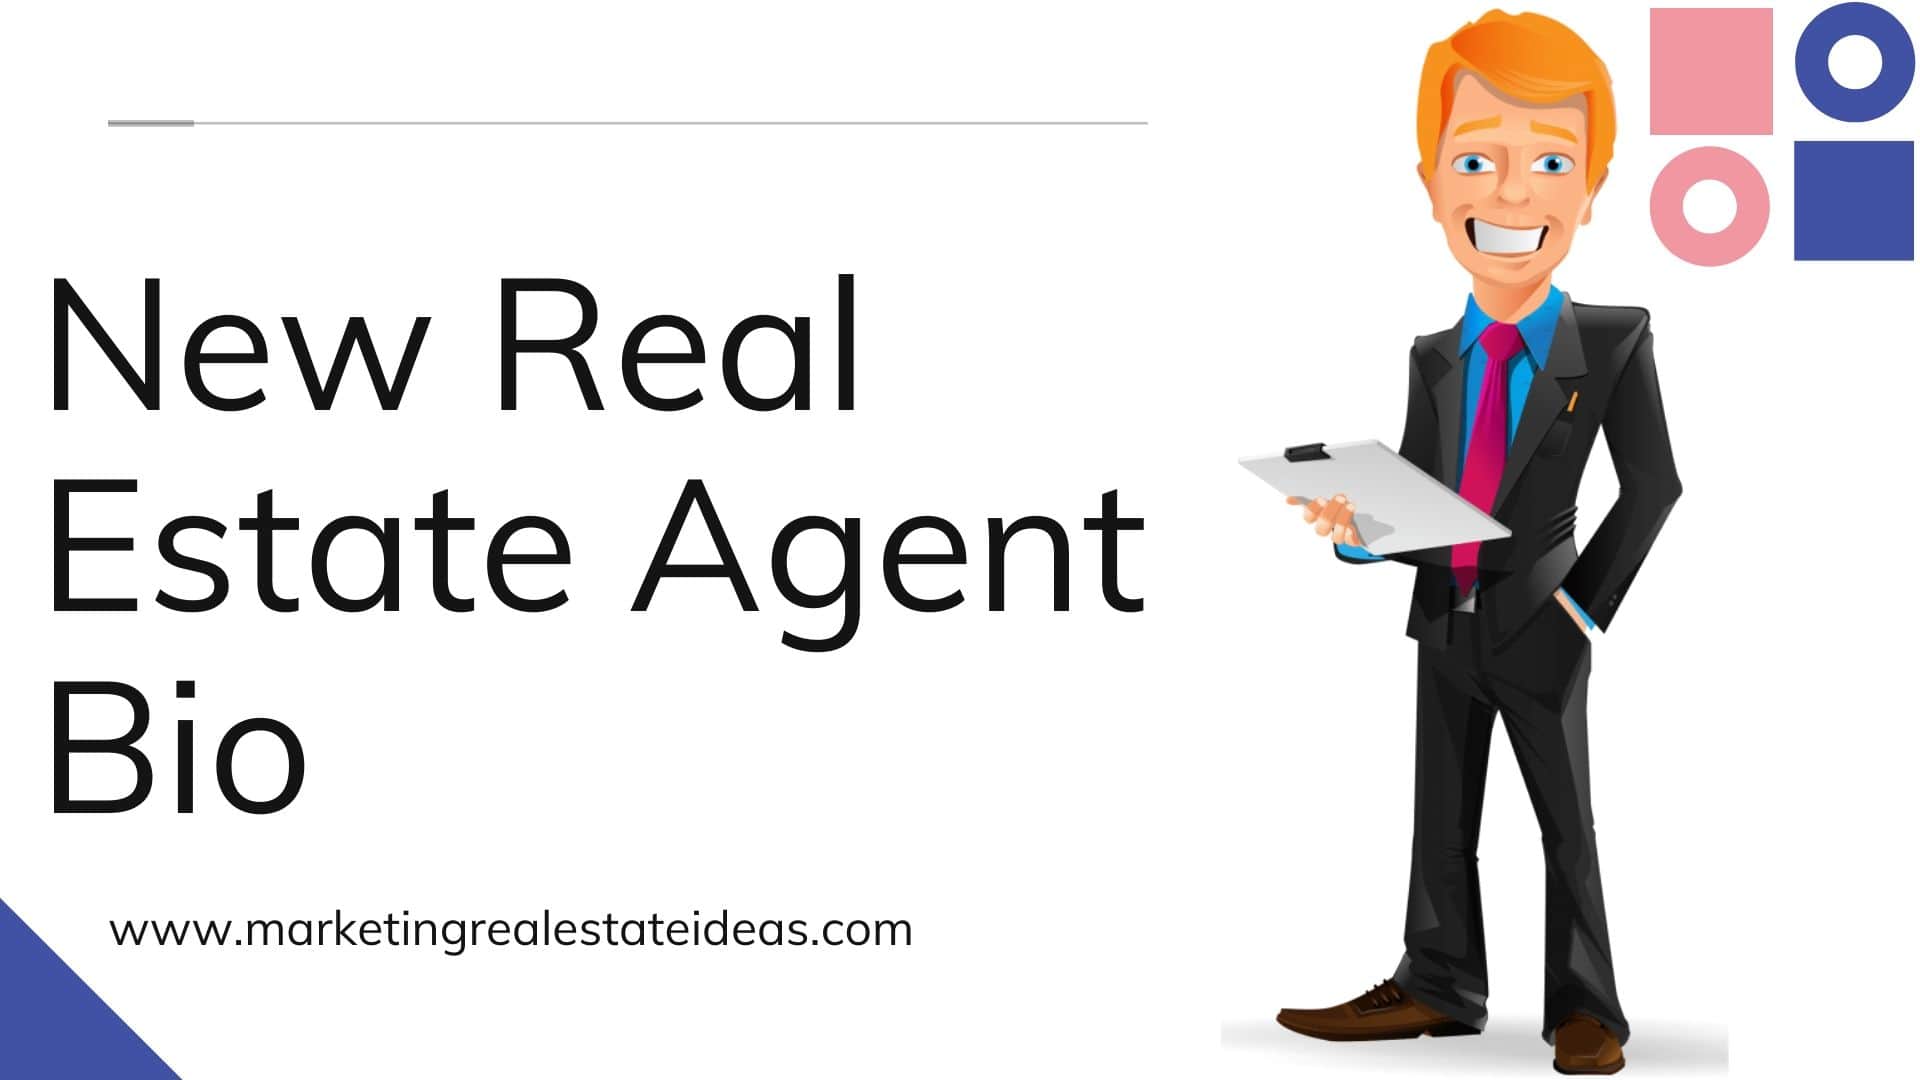 5 Real Estate Agent Bio Examples We Love - The Close